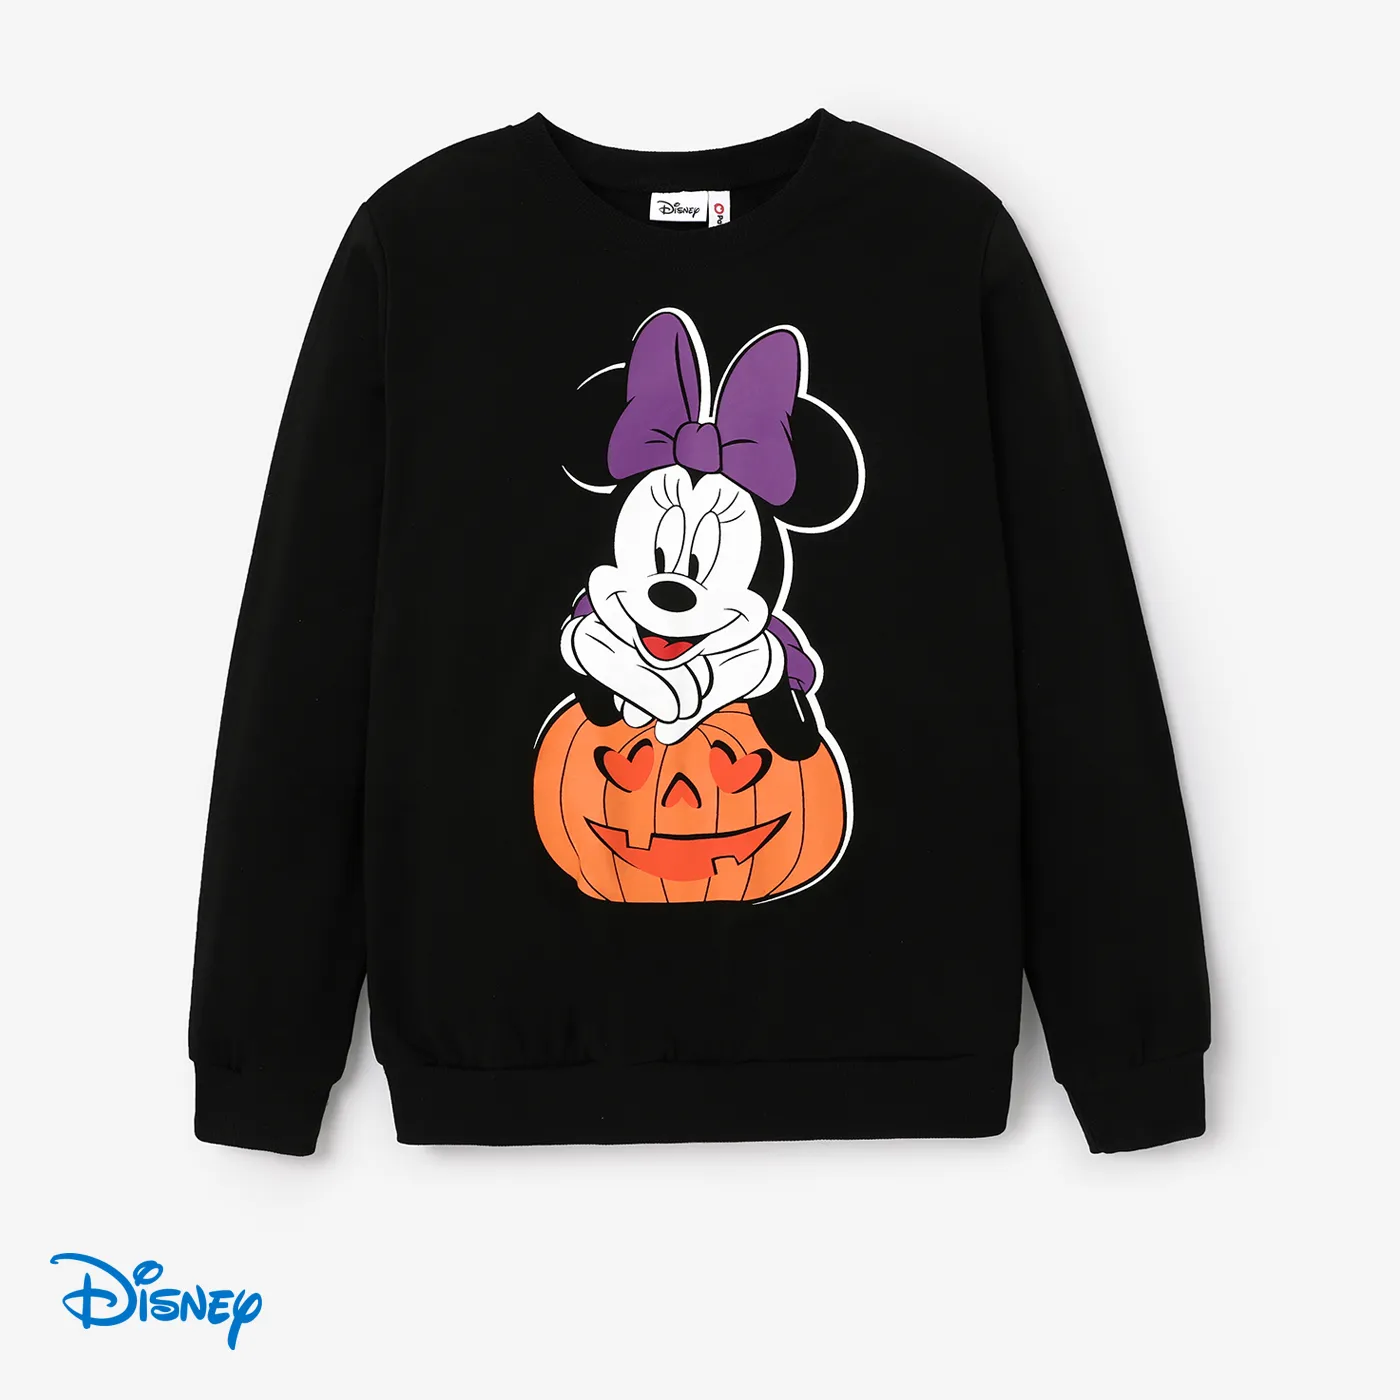 

Disney Mickey and Minnie Halloween Family Matching Character Pattern Crew Neck Top